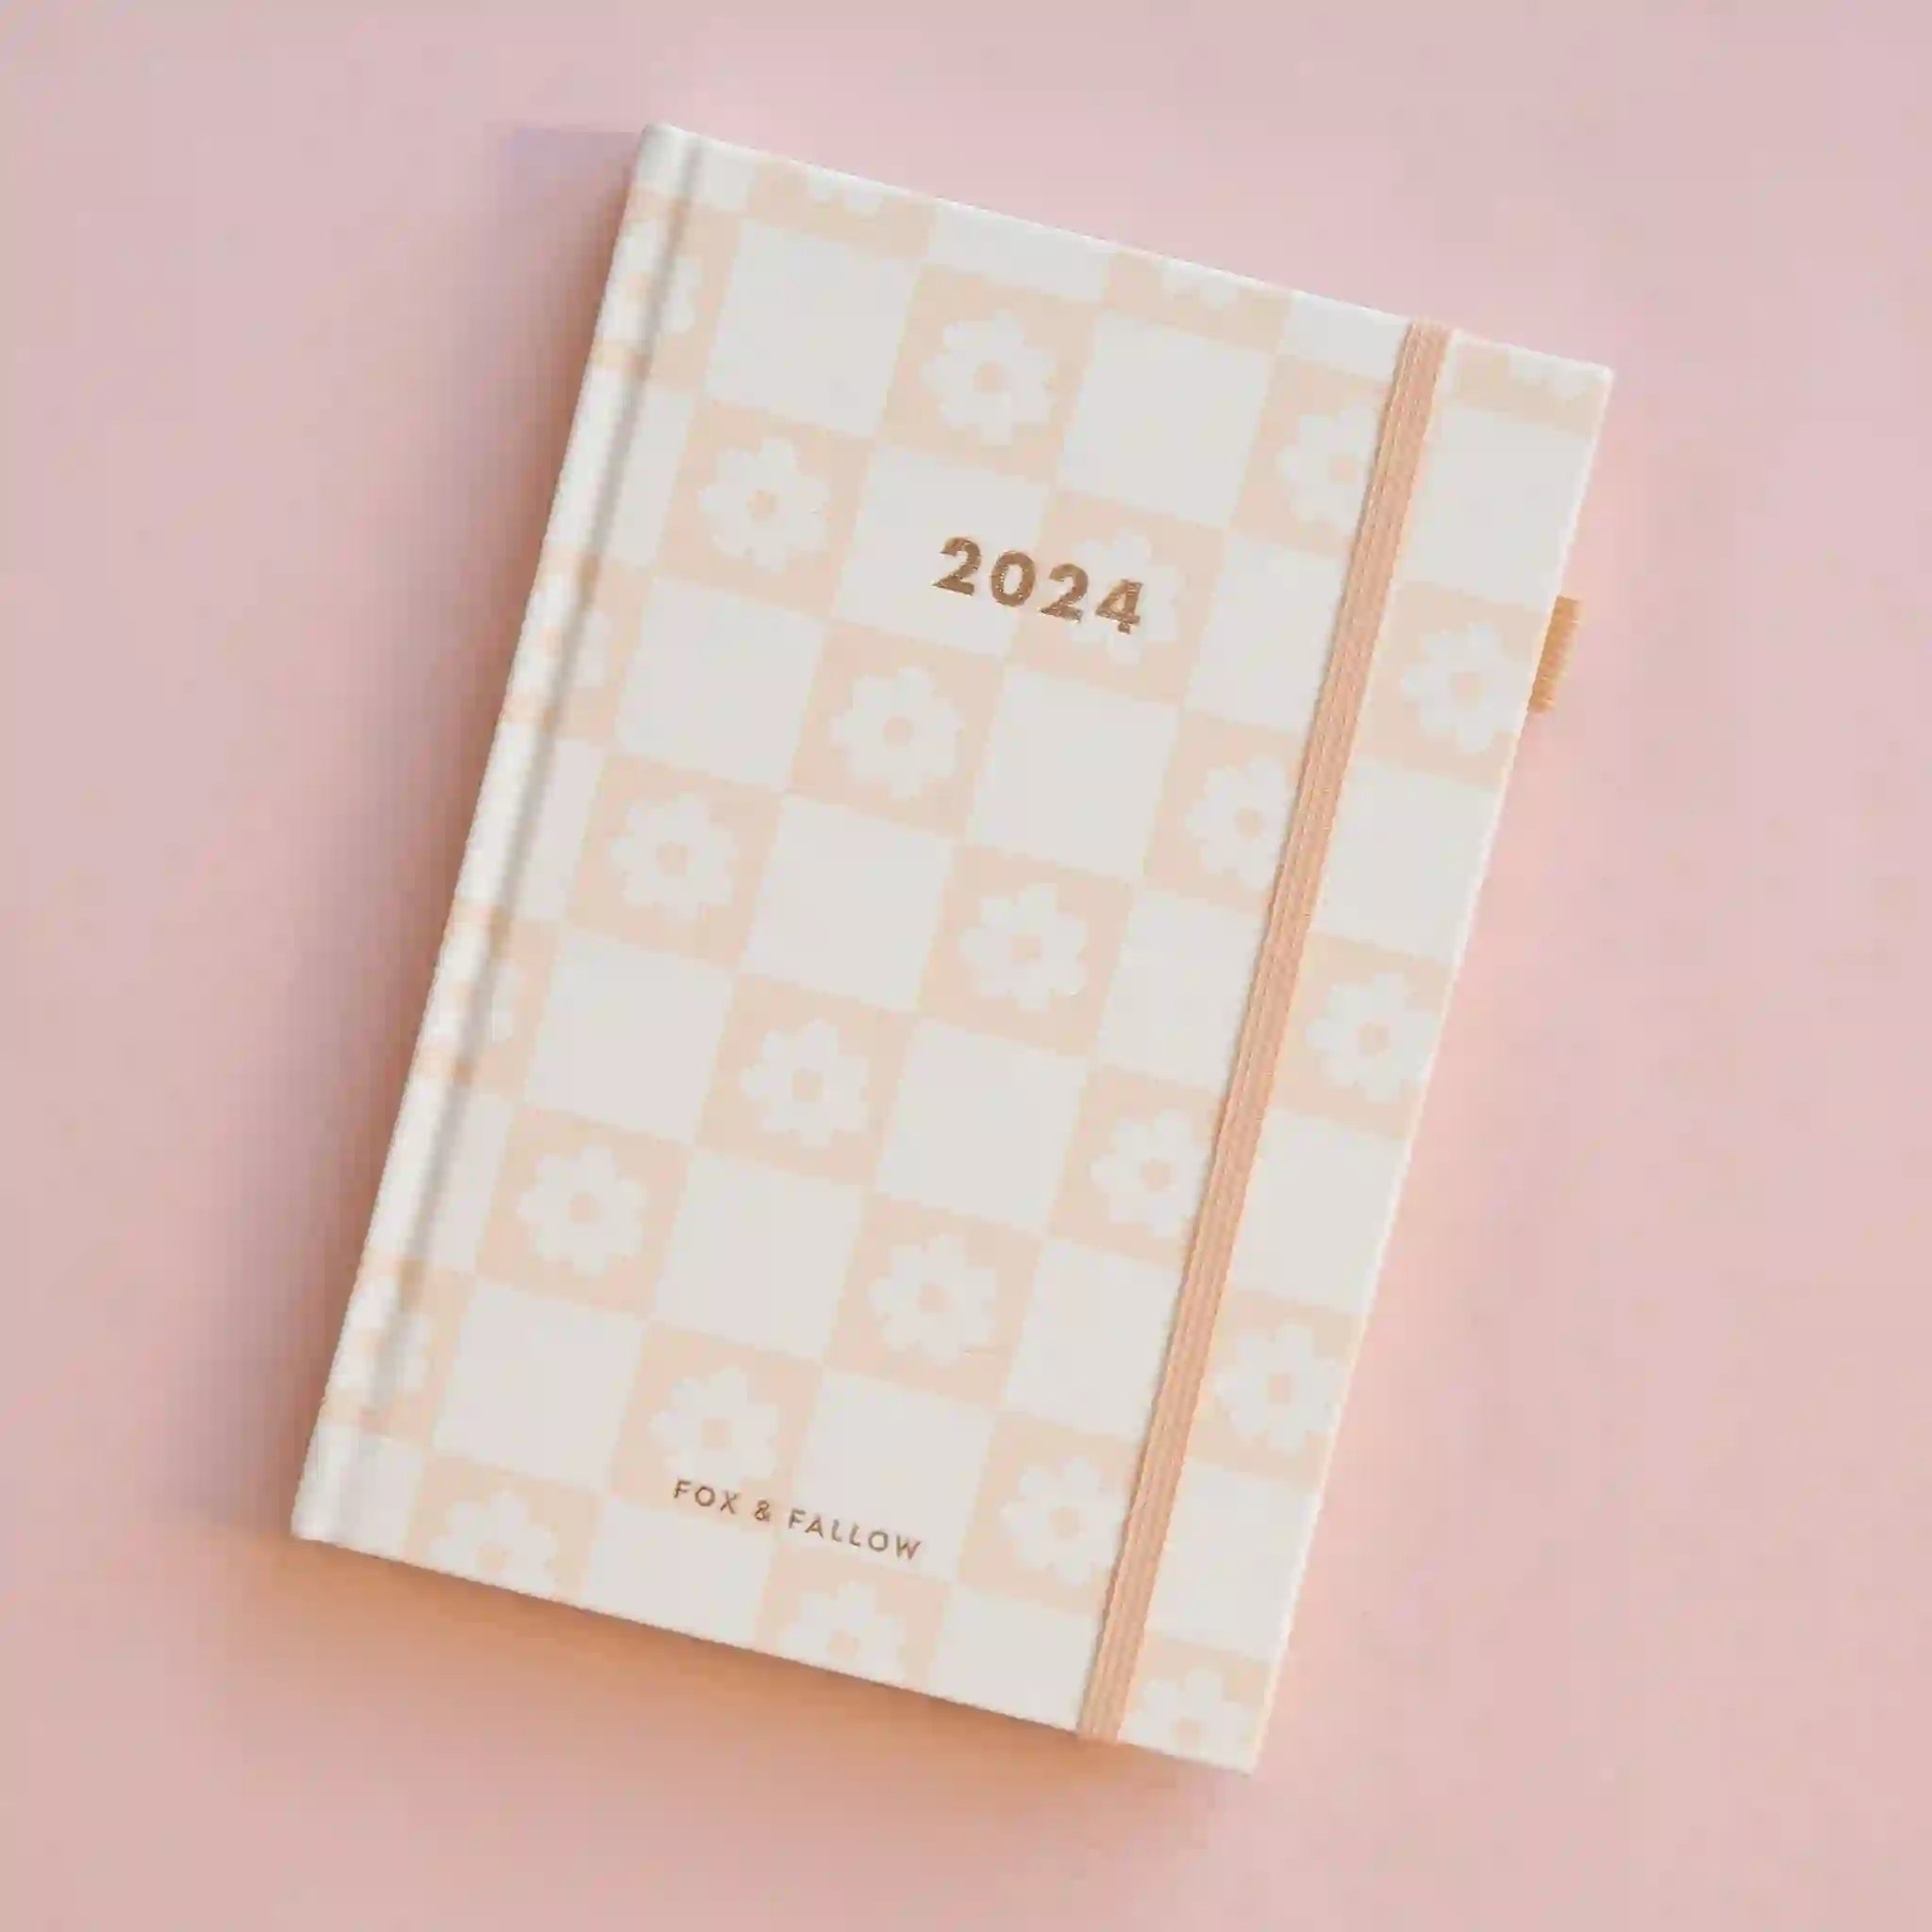 On a pink background is a light pink and ivory checkered planner with gold foiled &quot;2024&quot; text in the center along with a light pink elastic loop for keeping shut.